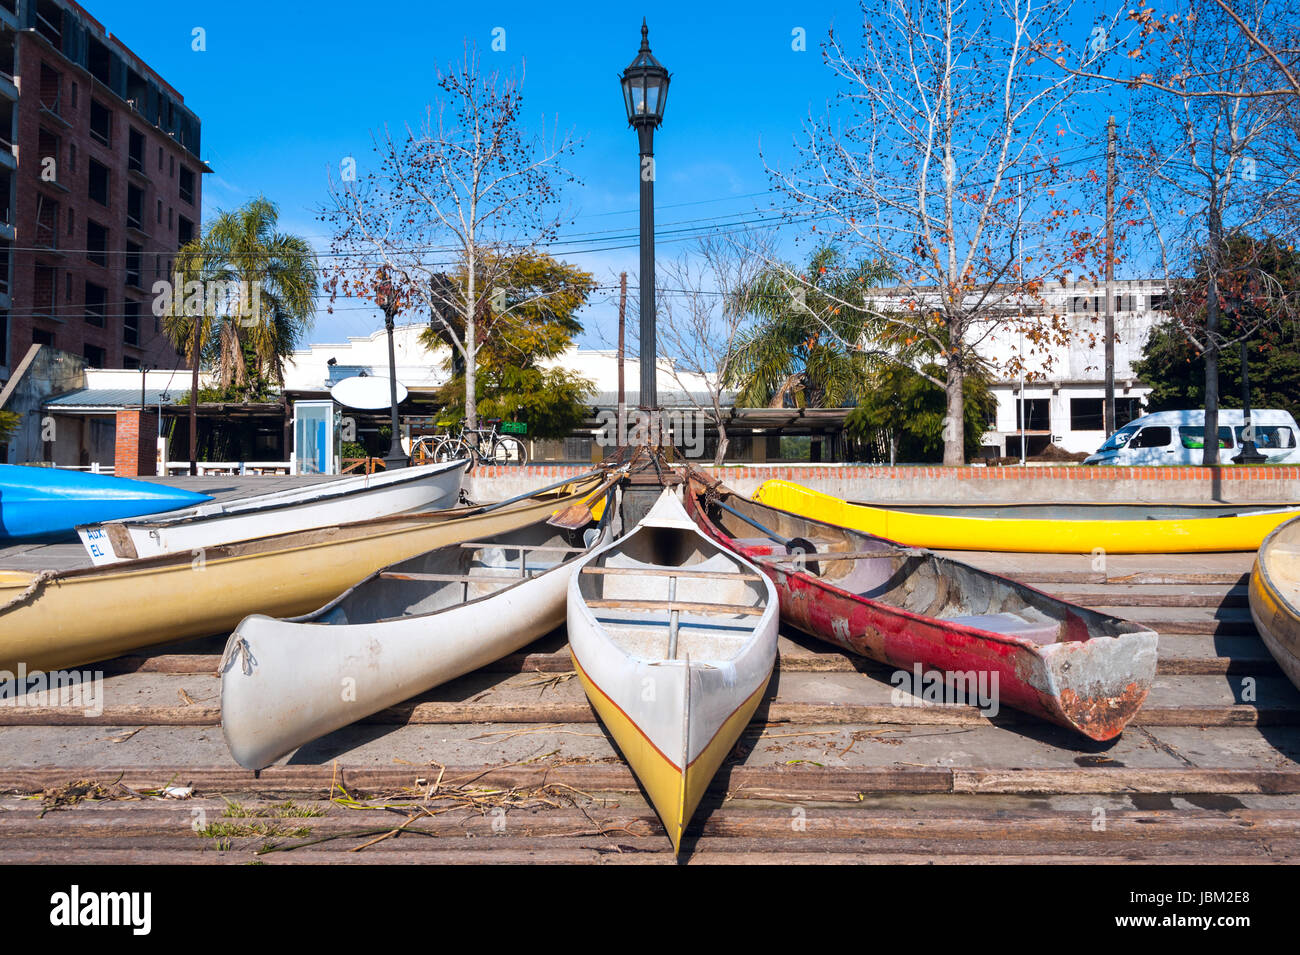 Parking of personal vehicles in El Tigre, a town in the delta of the Rio de la Plata, province of Buenos Aires, Argentina Stock Photo